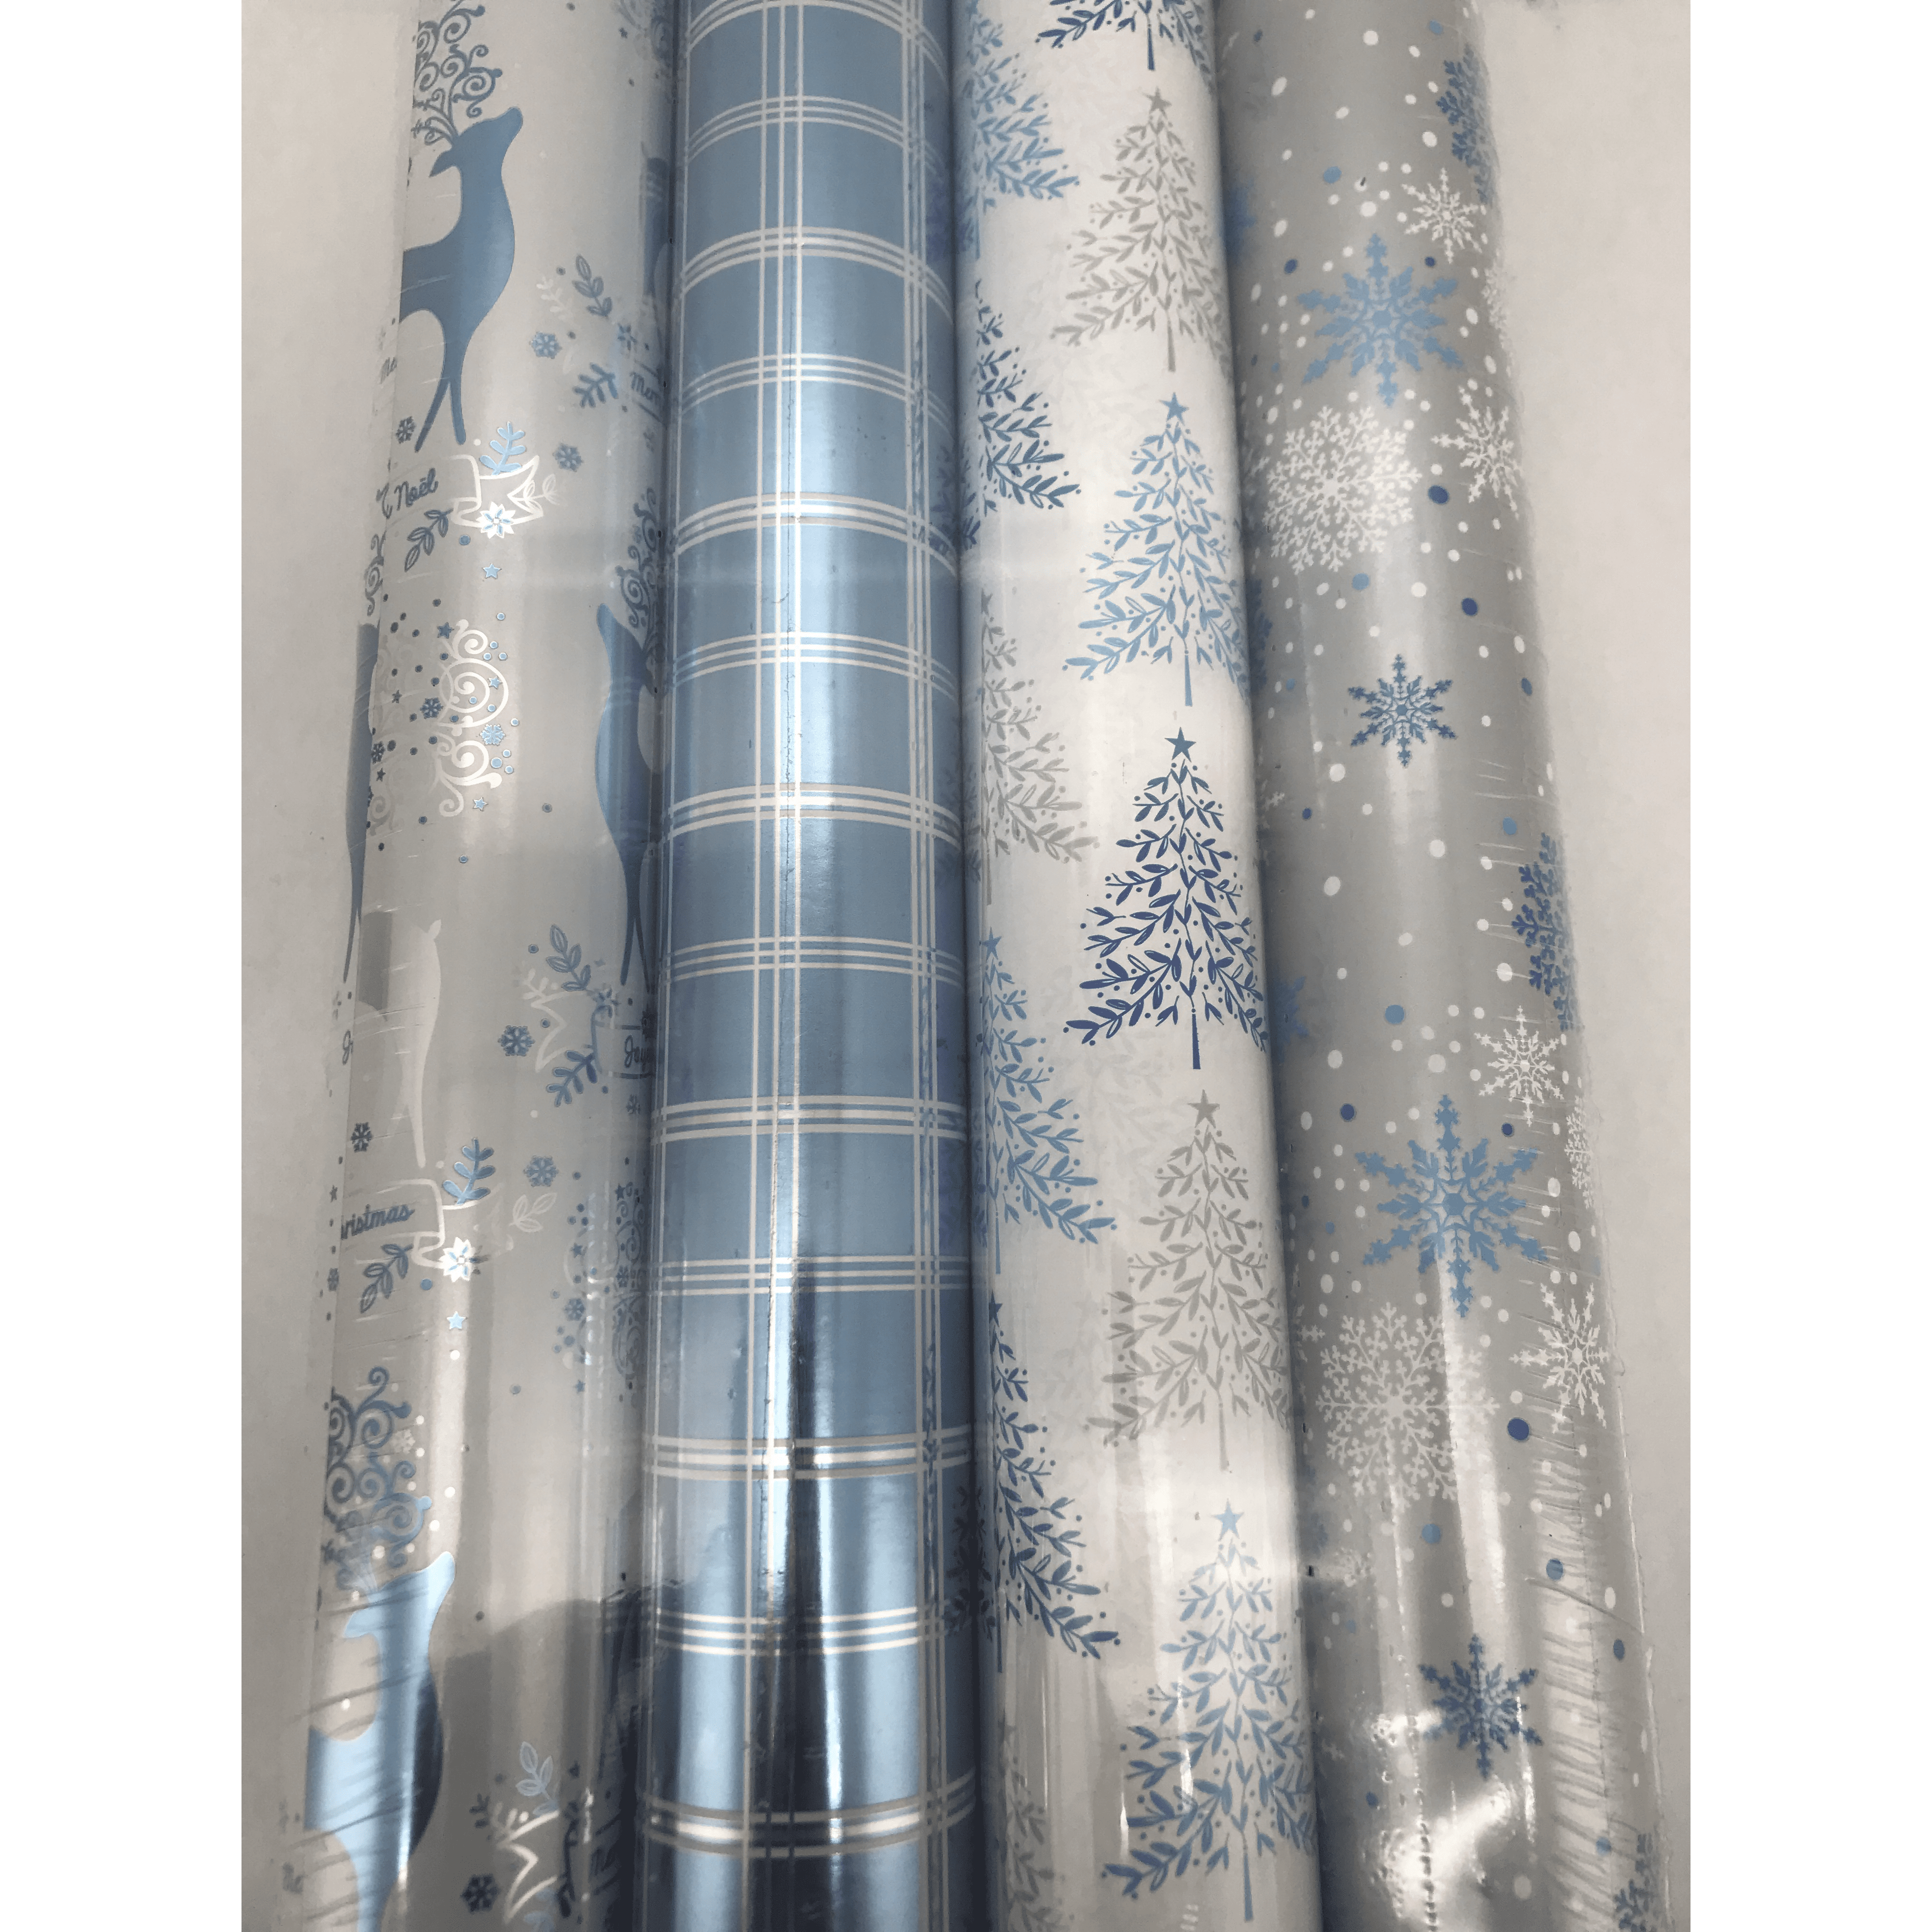 Kirkland Christmas Wrapping Paper / 4 Rolls Per Package / Various